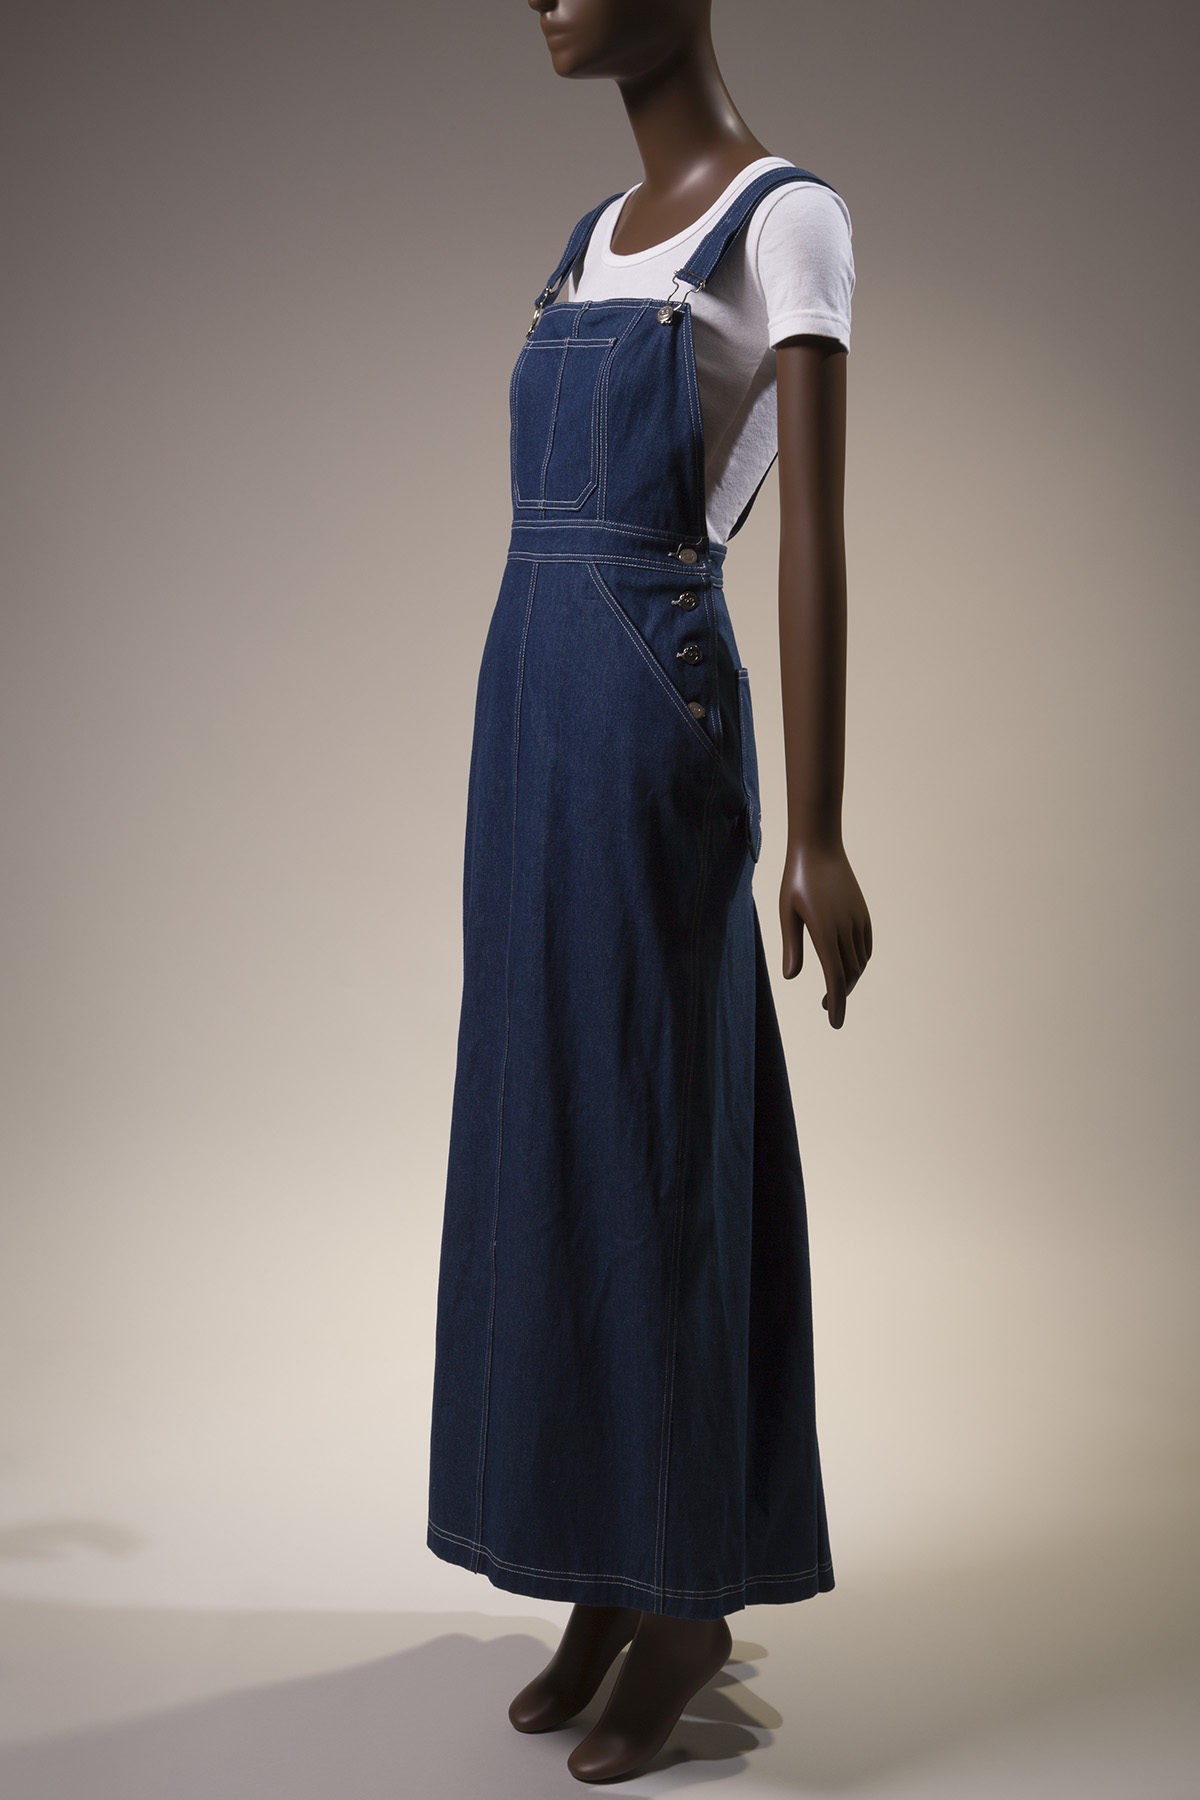 denim overalls dress styled with white cotton shirt